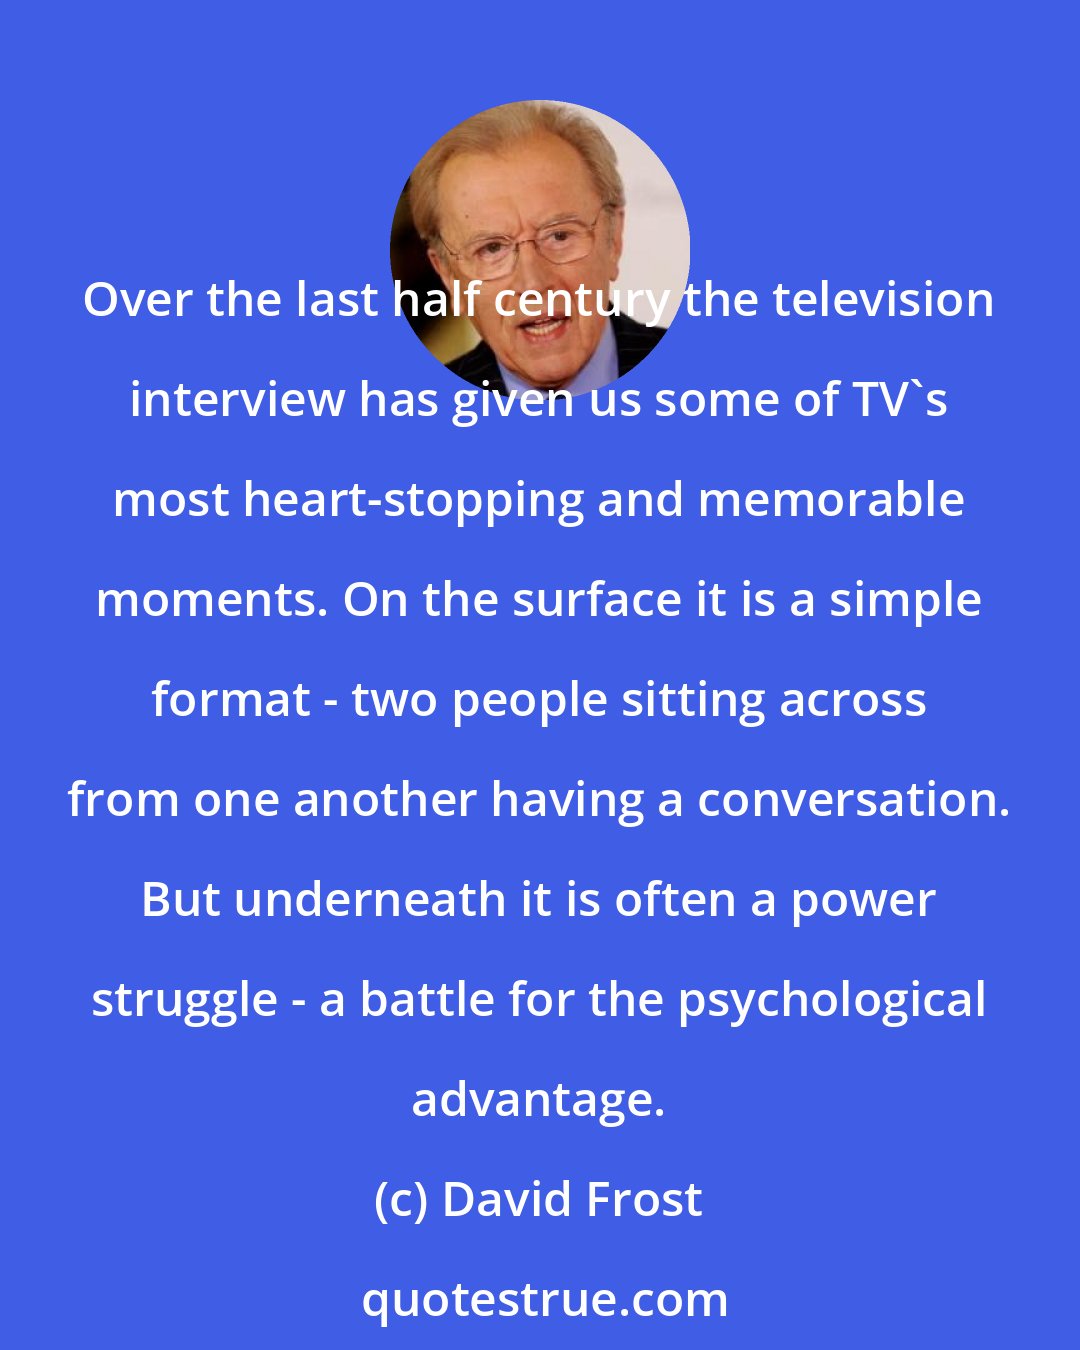 David Frost: Over the last half century the television interview has given us some of TV's most heart-stopping and memorable moments. On the surface it is a simple format - two people sitting across from one another having a conversation. But underneath it is often a power struggle - a battle for the psychological advantage.